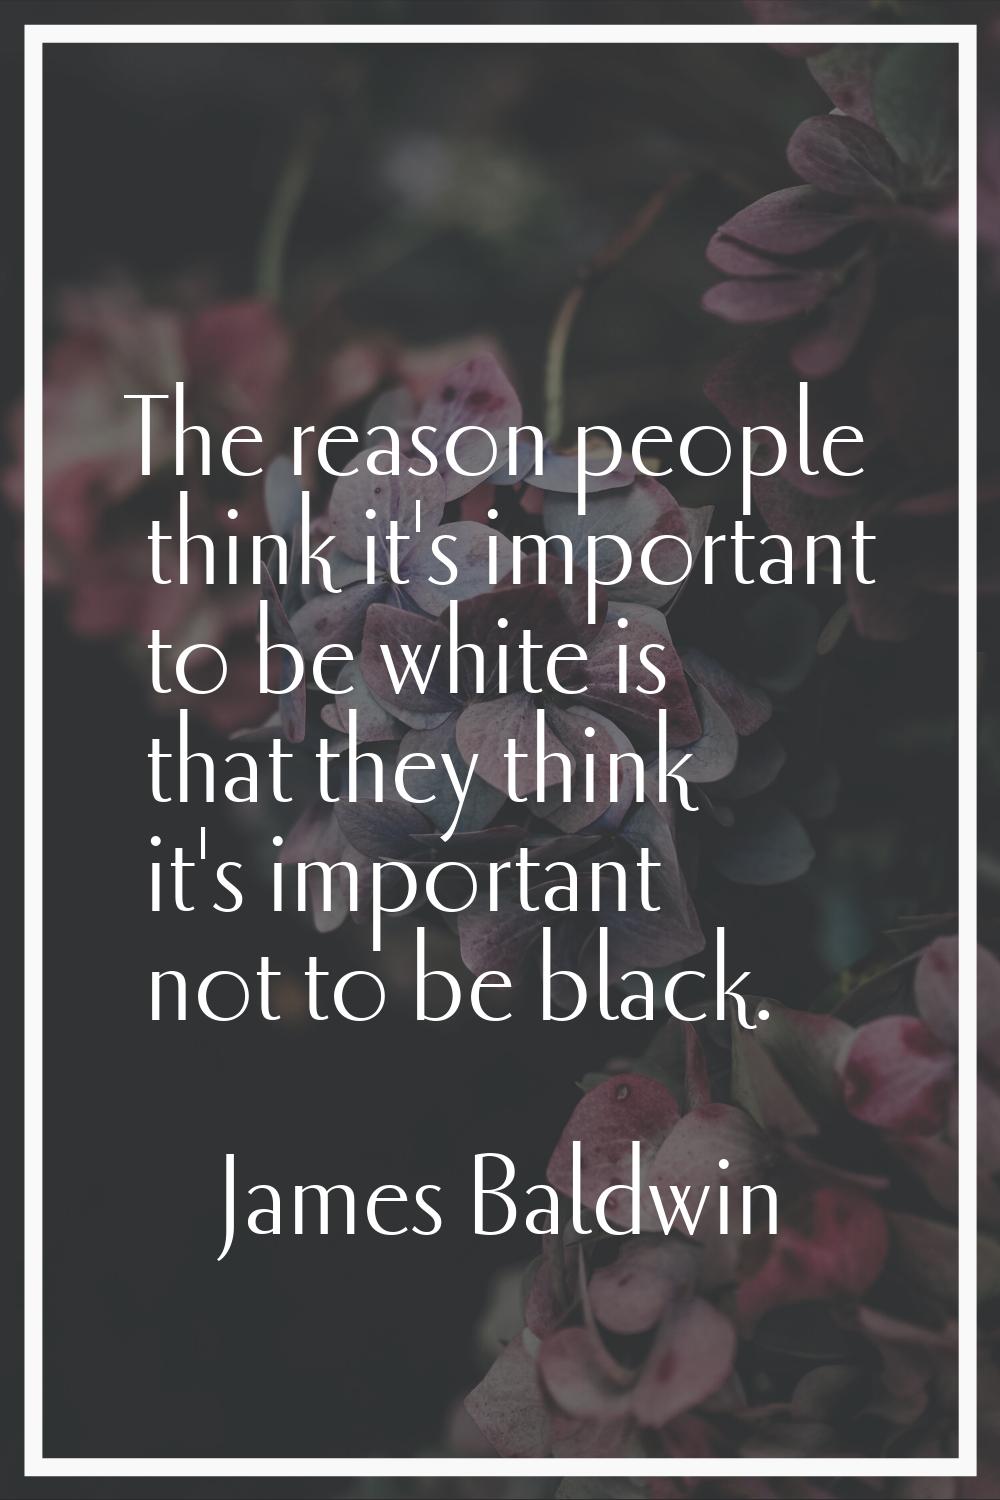 The reason people think it's important to be white is that they think it's important not to be blac